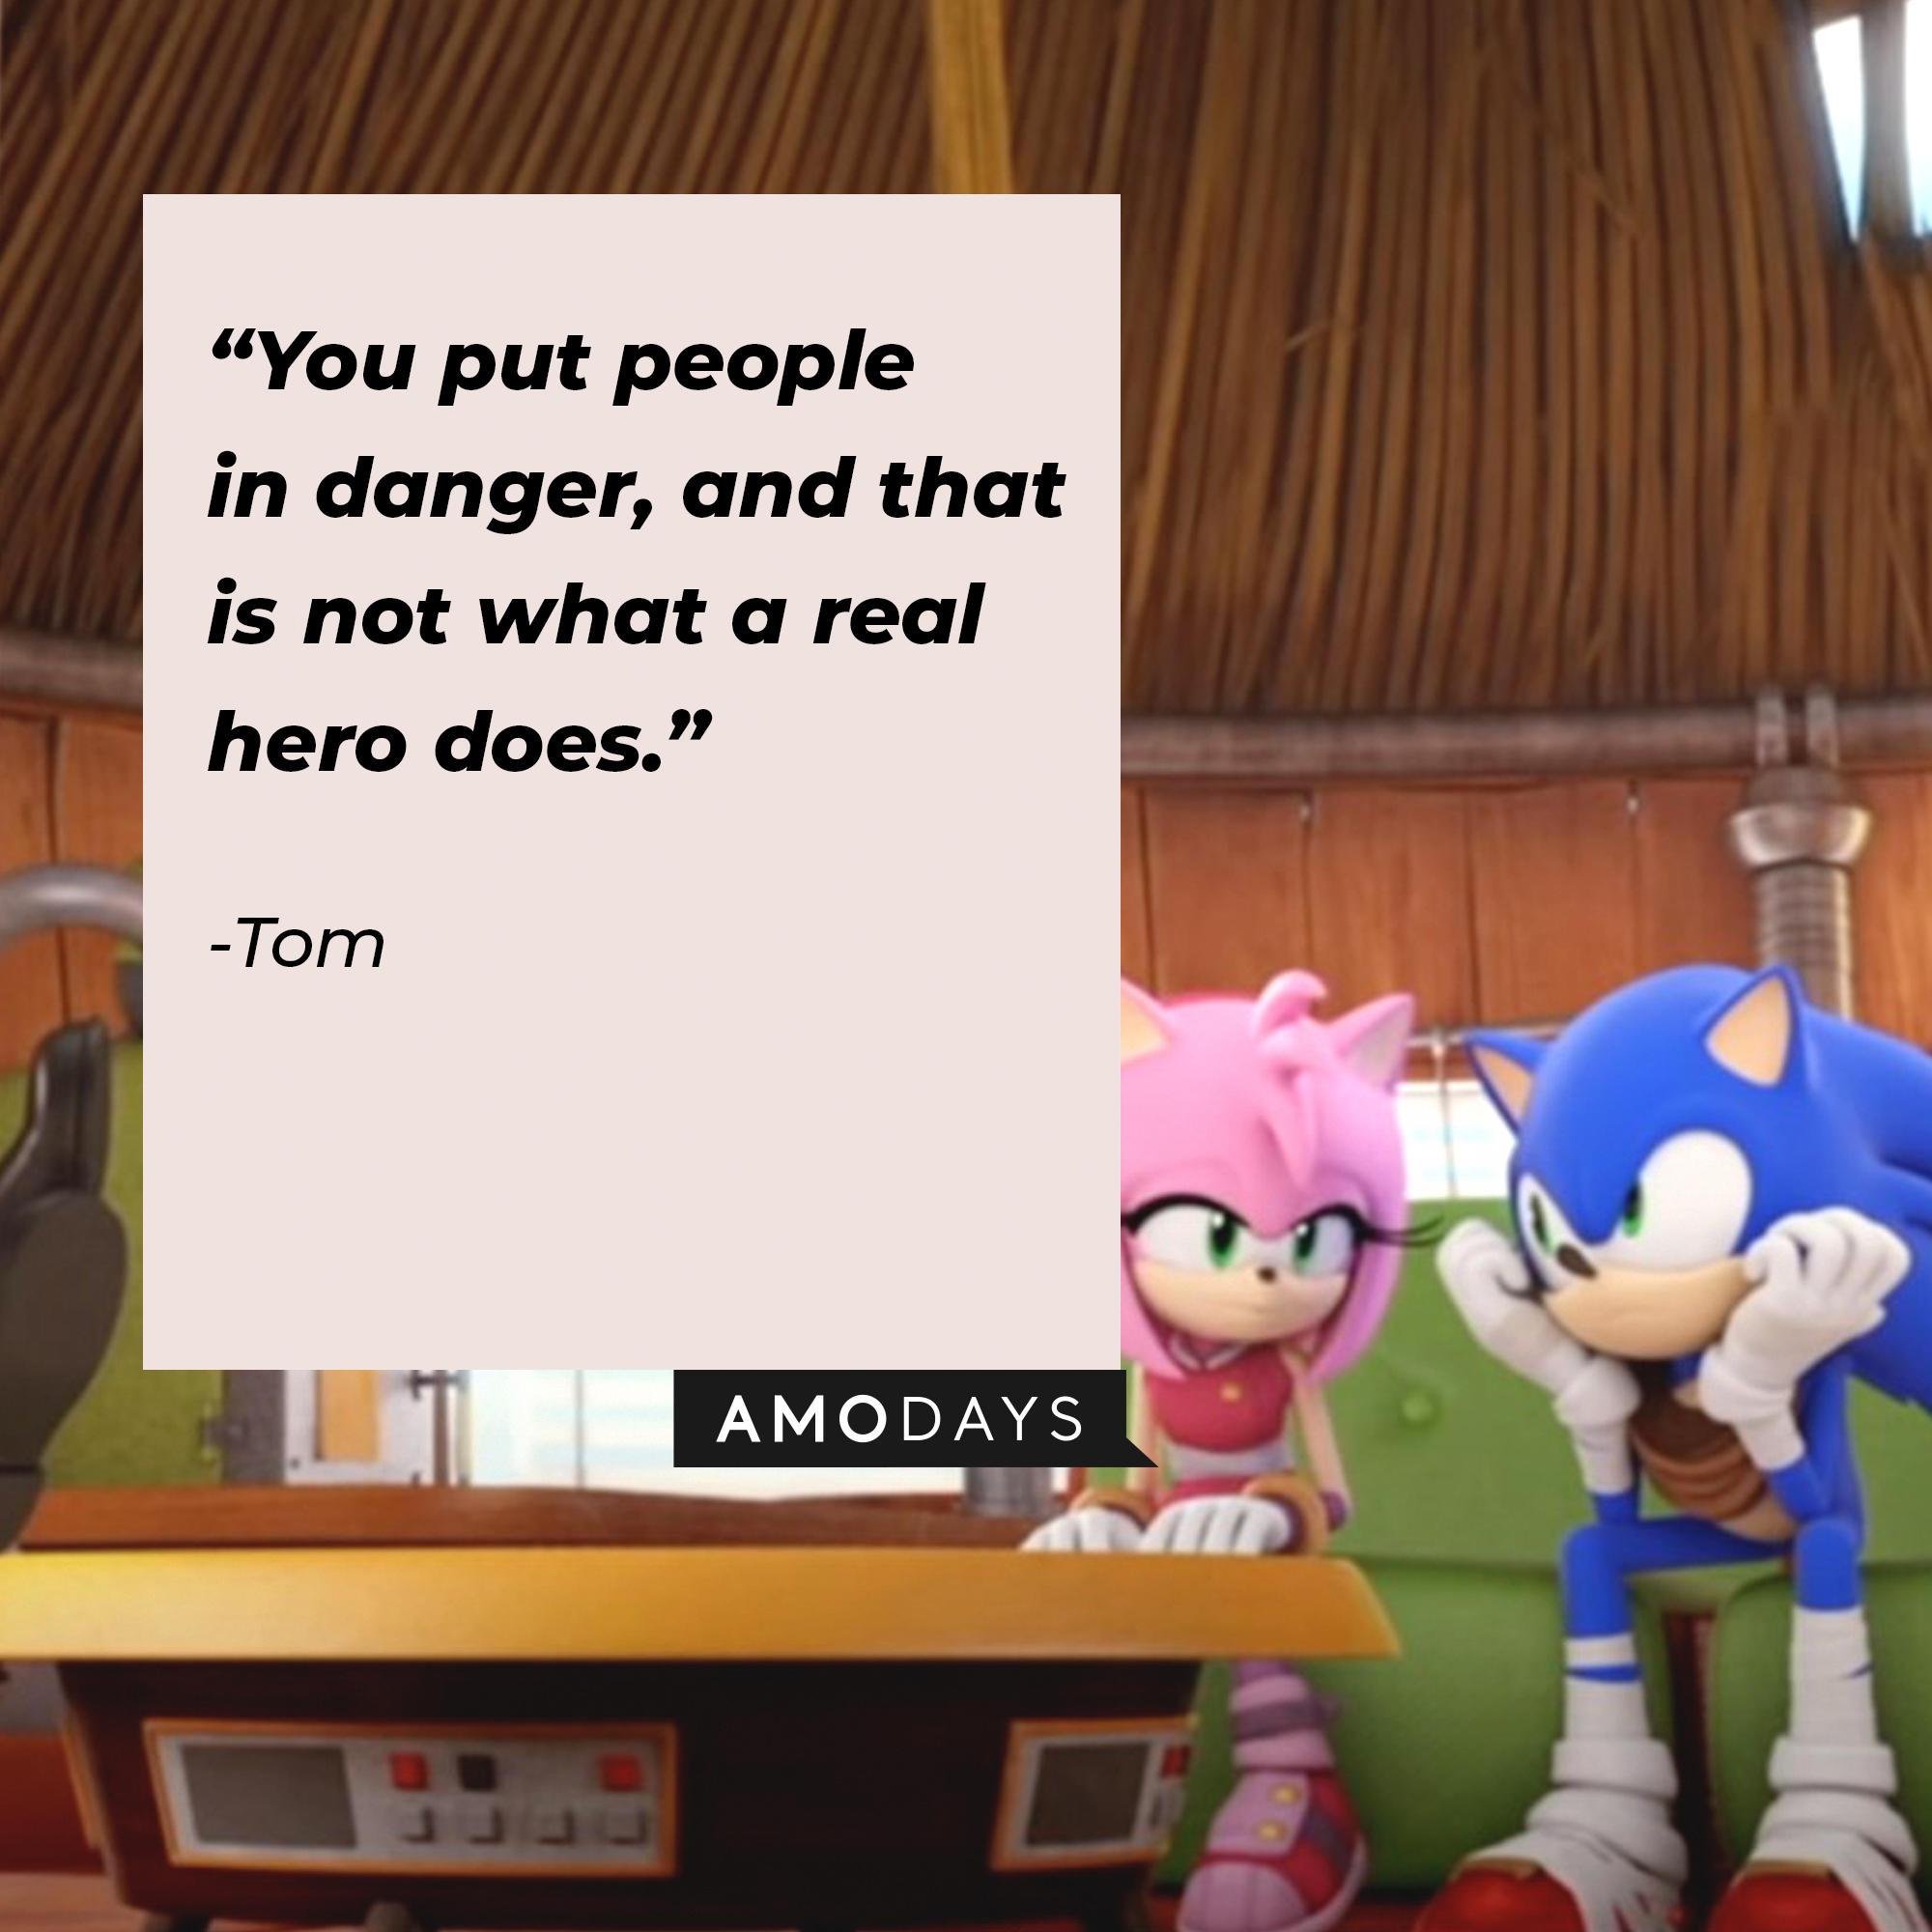 An image of Sonic and Amy Rose with Tom’s quote: “You put people in danger, and that is not what a real hero does.” | Source: youtube.com/Sonic.Boom_Official